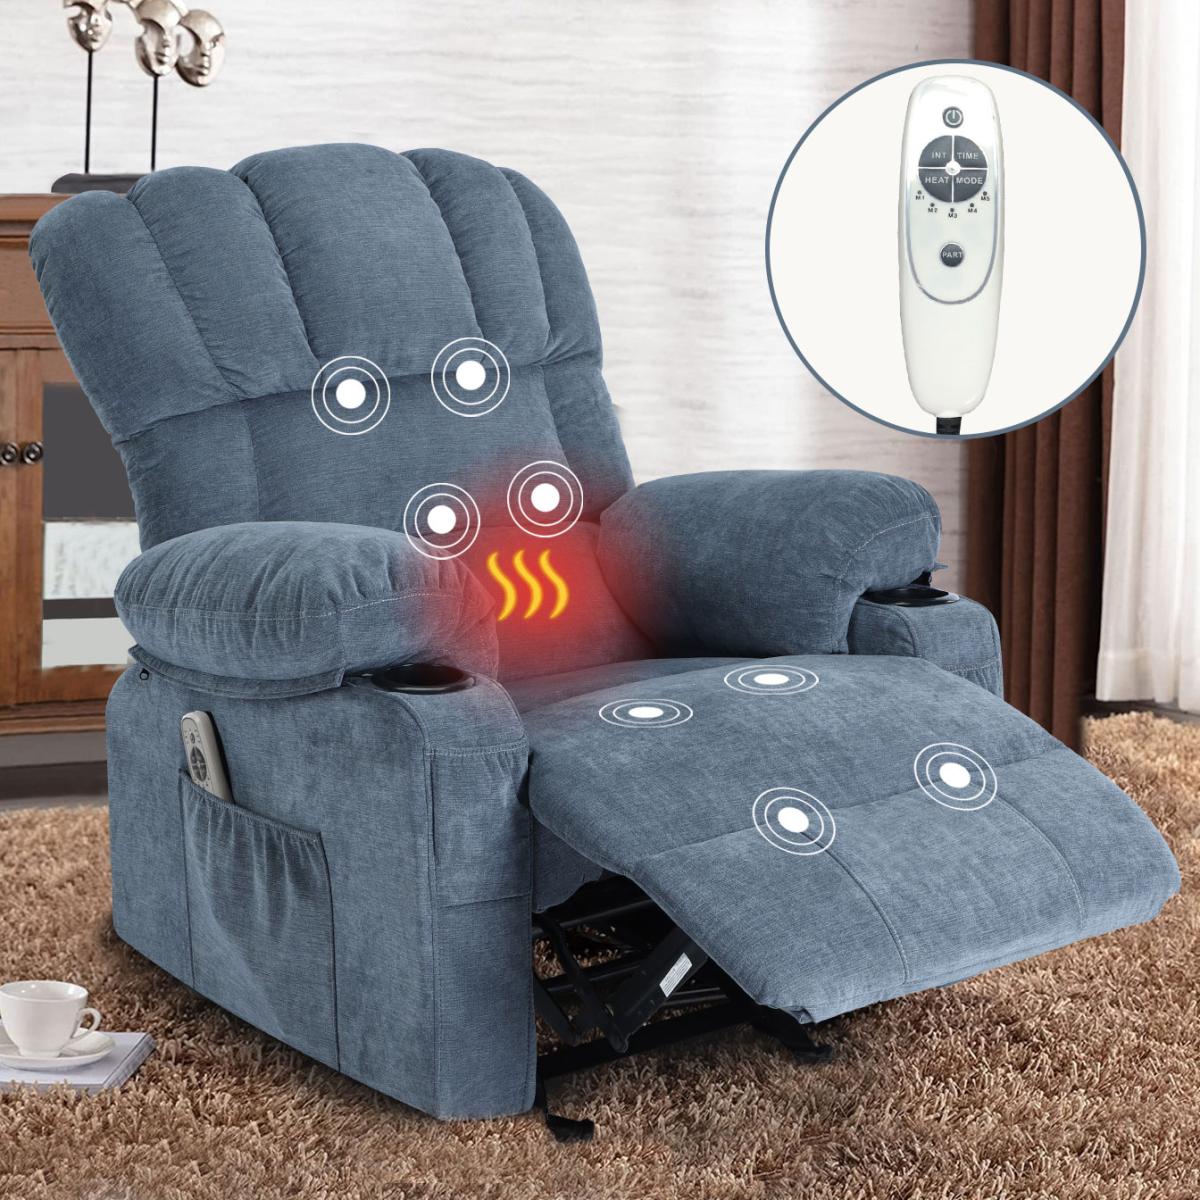 Vanbow.Recliner Chair Massage Heating sofa with Usb and side pocket 2 Cup Holders (Blue)